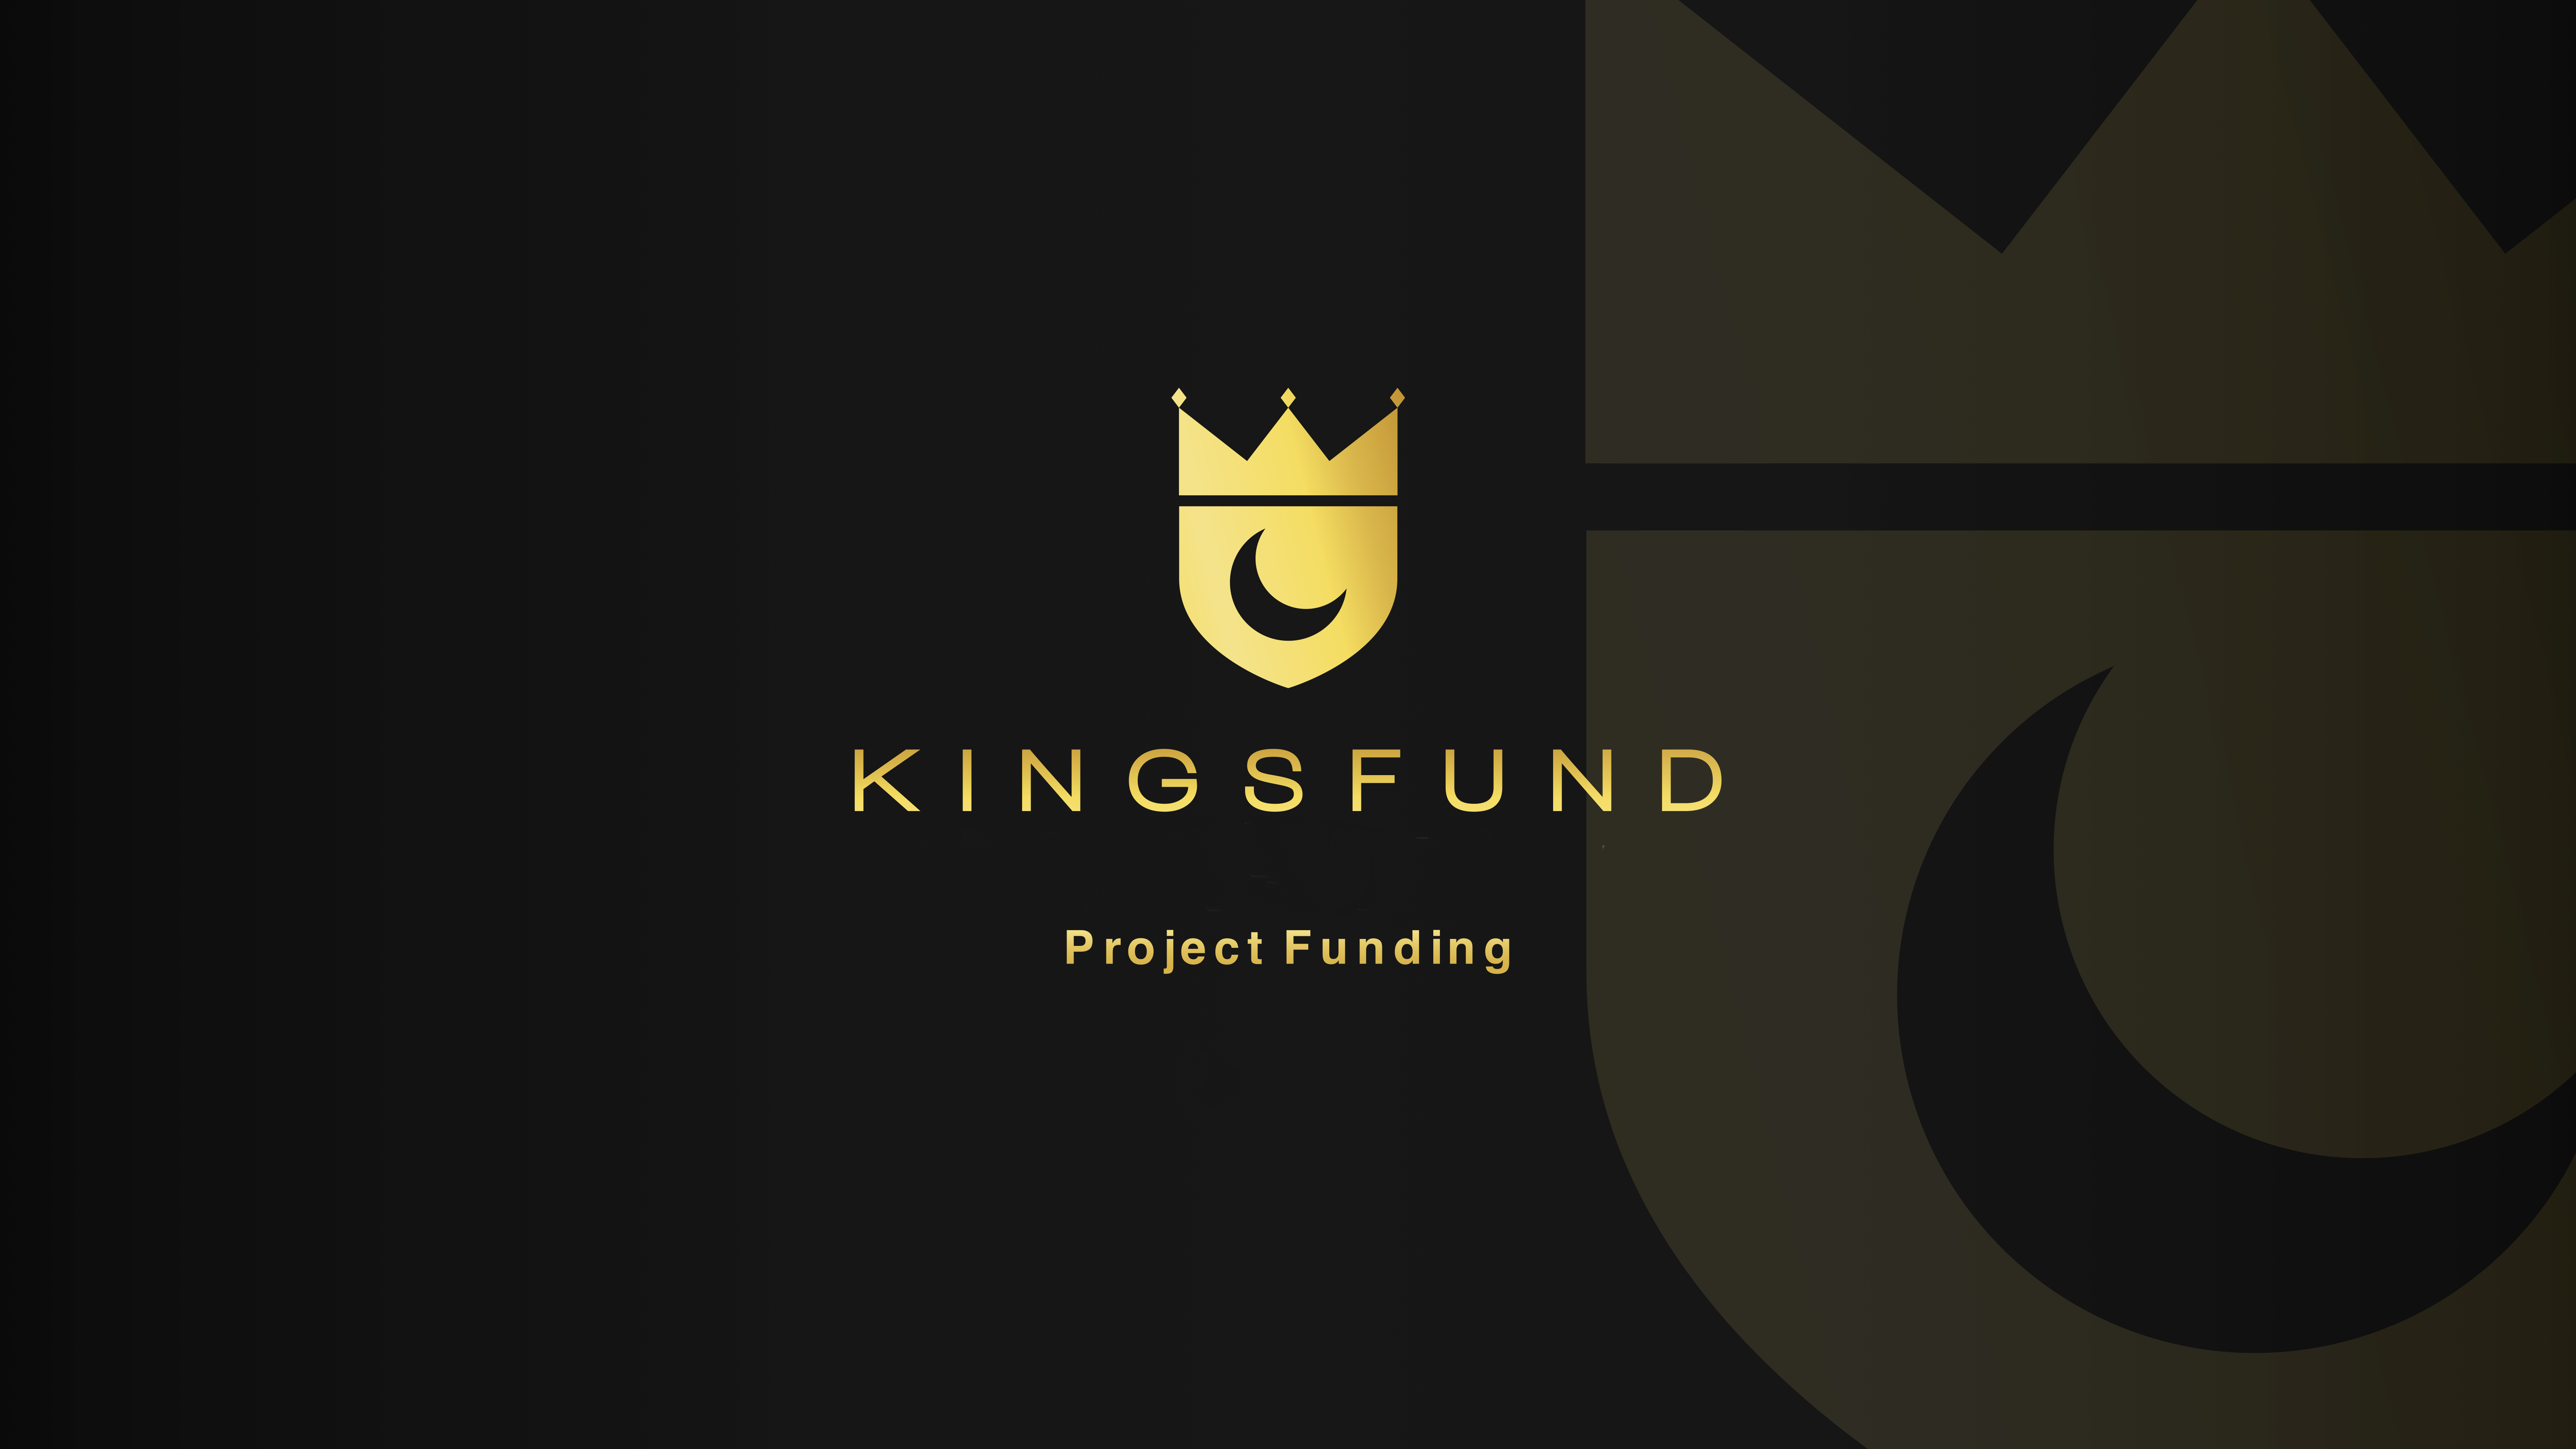 project funding